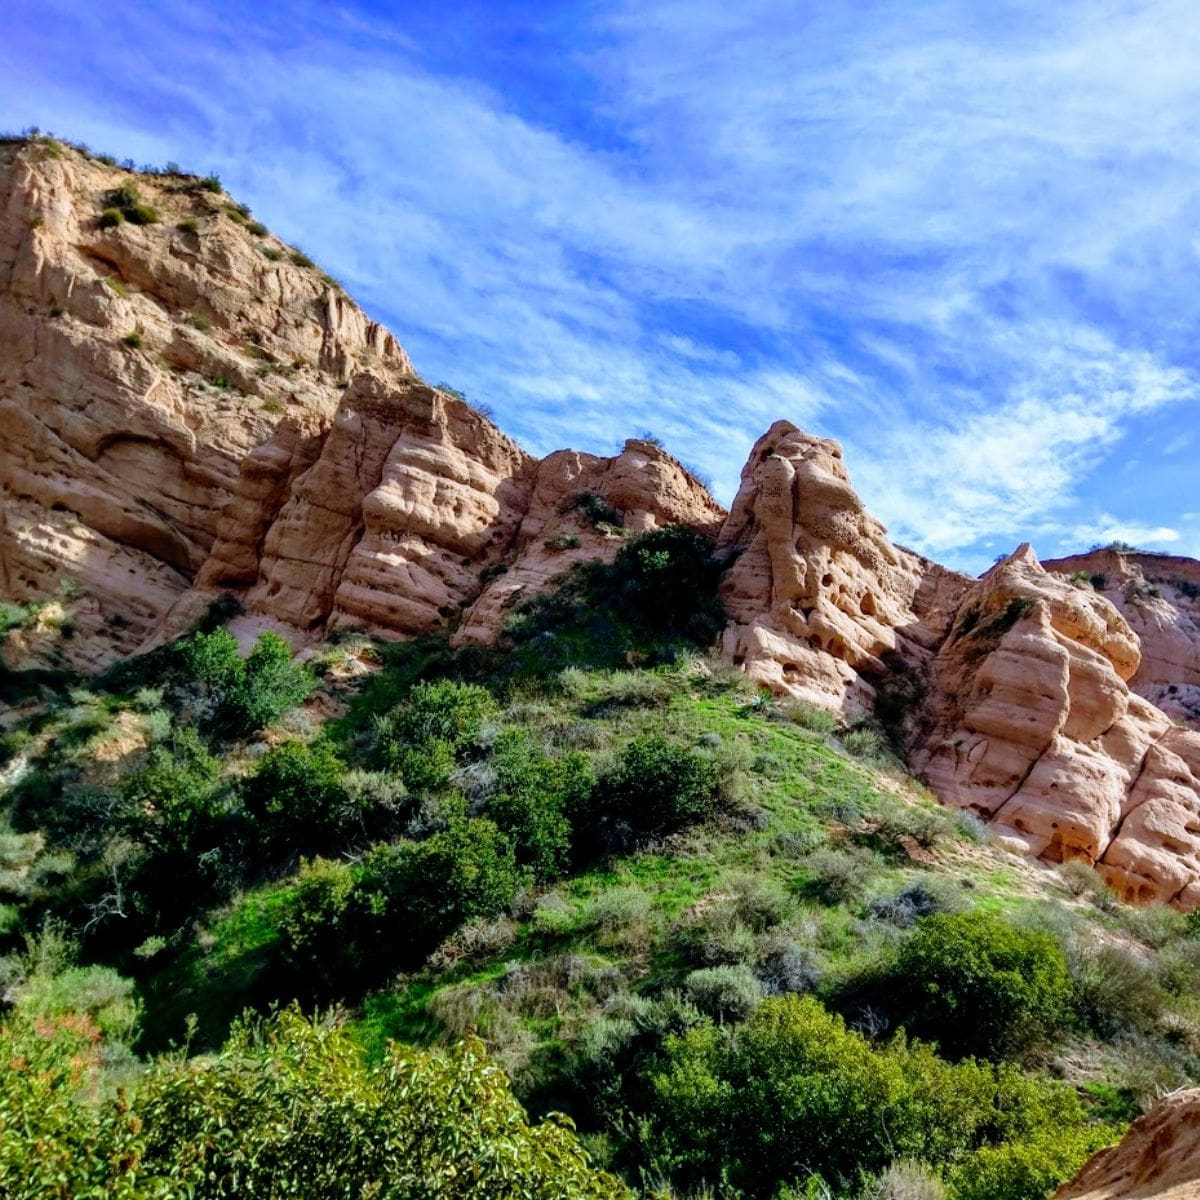 Whiting Ranch Wilderness Park